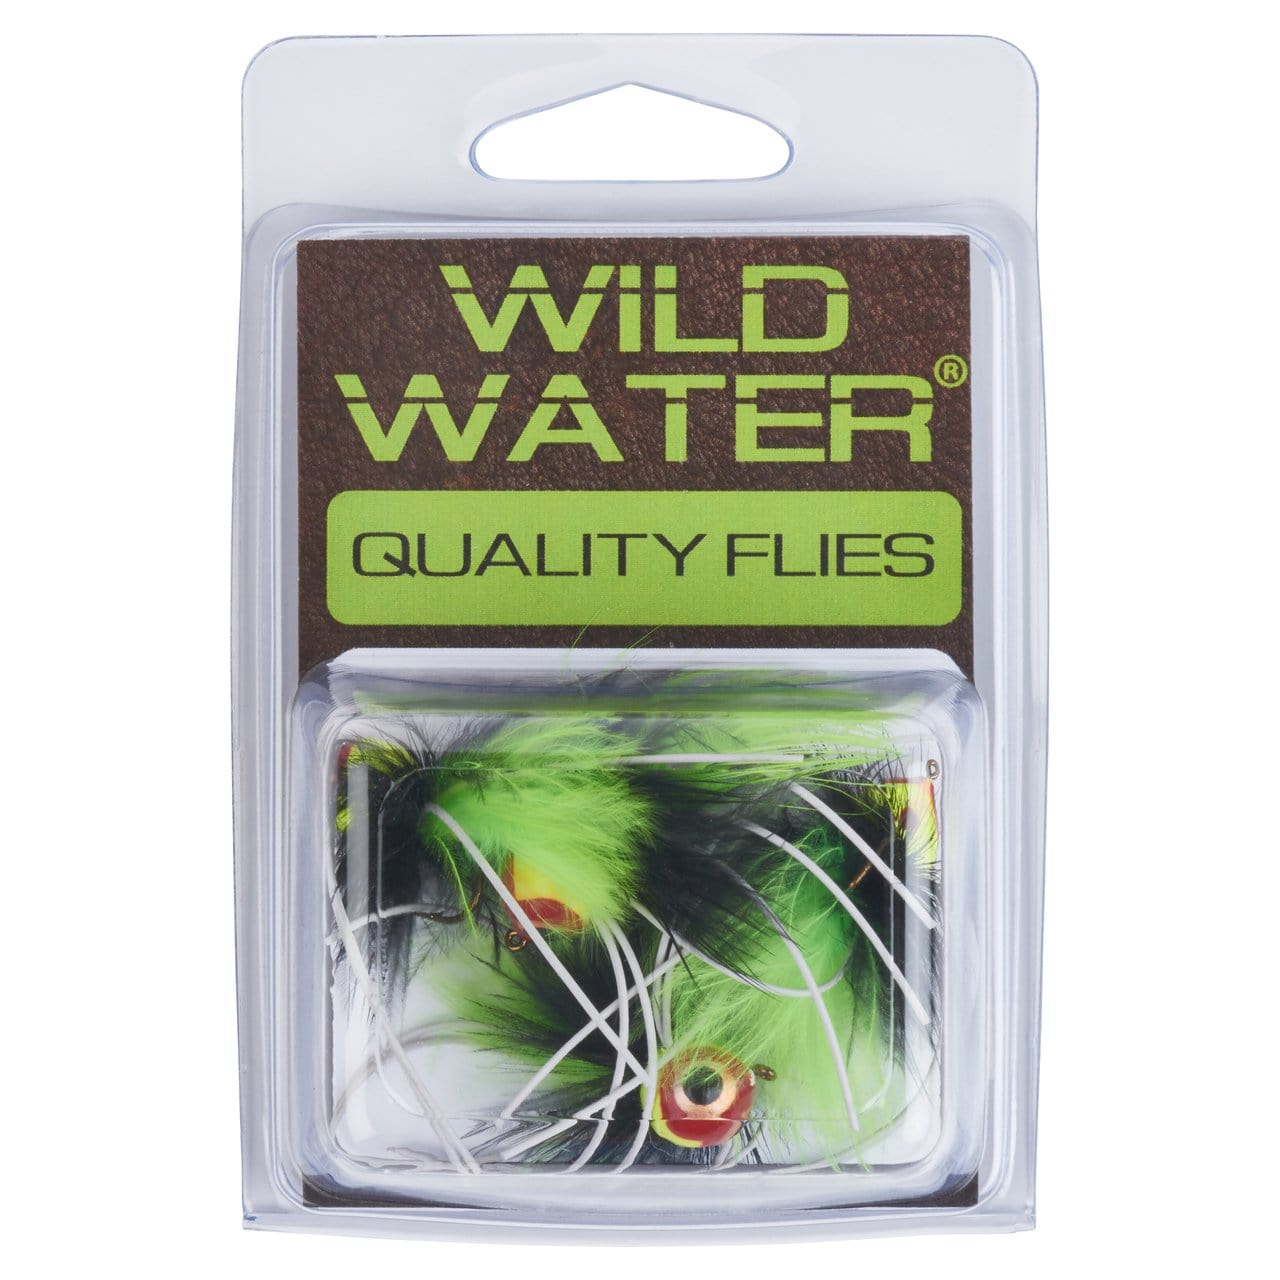 Wild Water Fly Fishing Chartreuse and Black Spherical Body Popper, Size 8, Qty. 4